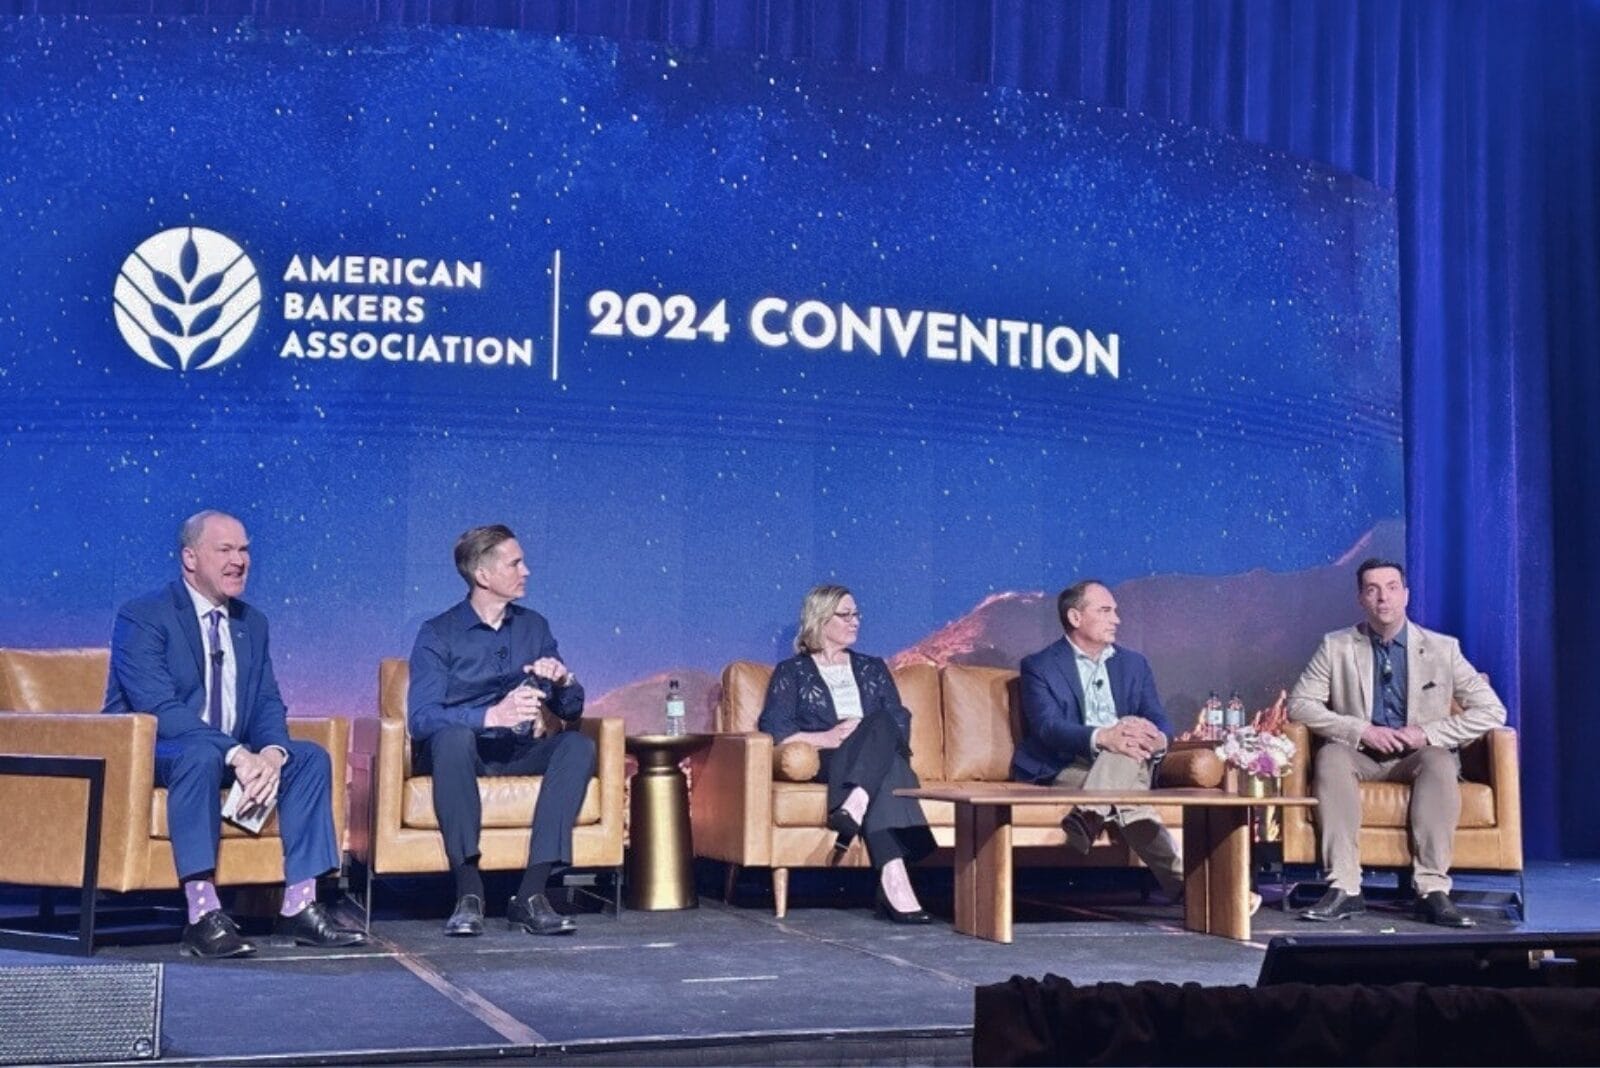 Panel speakers for a discussion on artificial intelligence at American Bakers Association Convention 2024